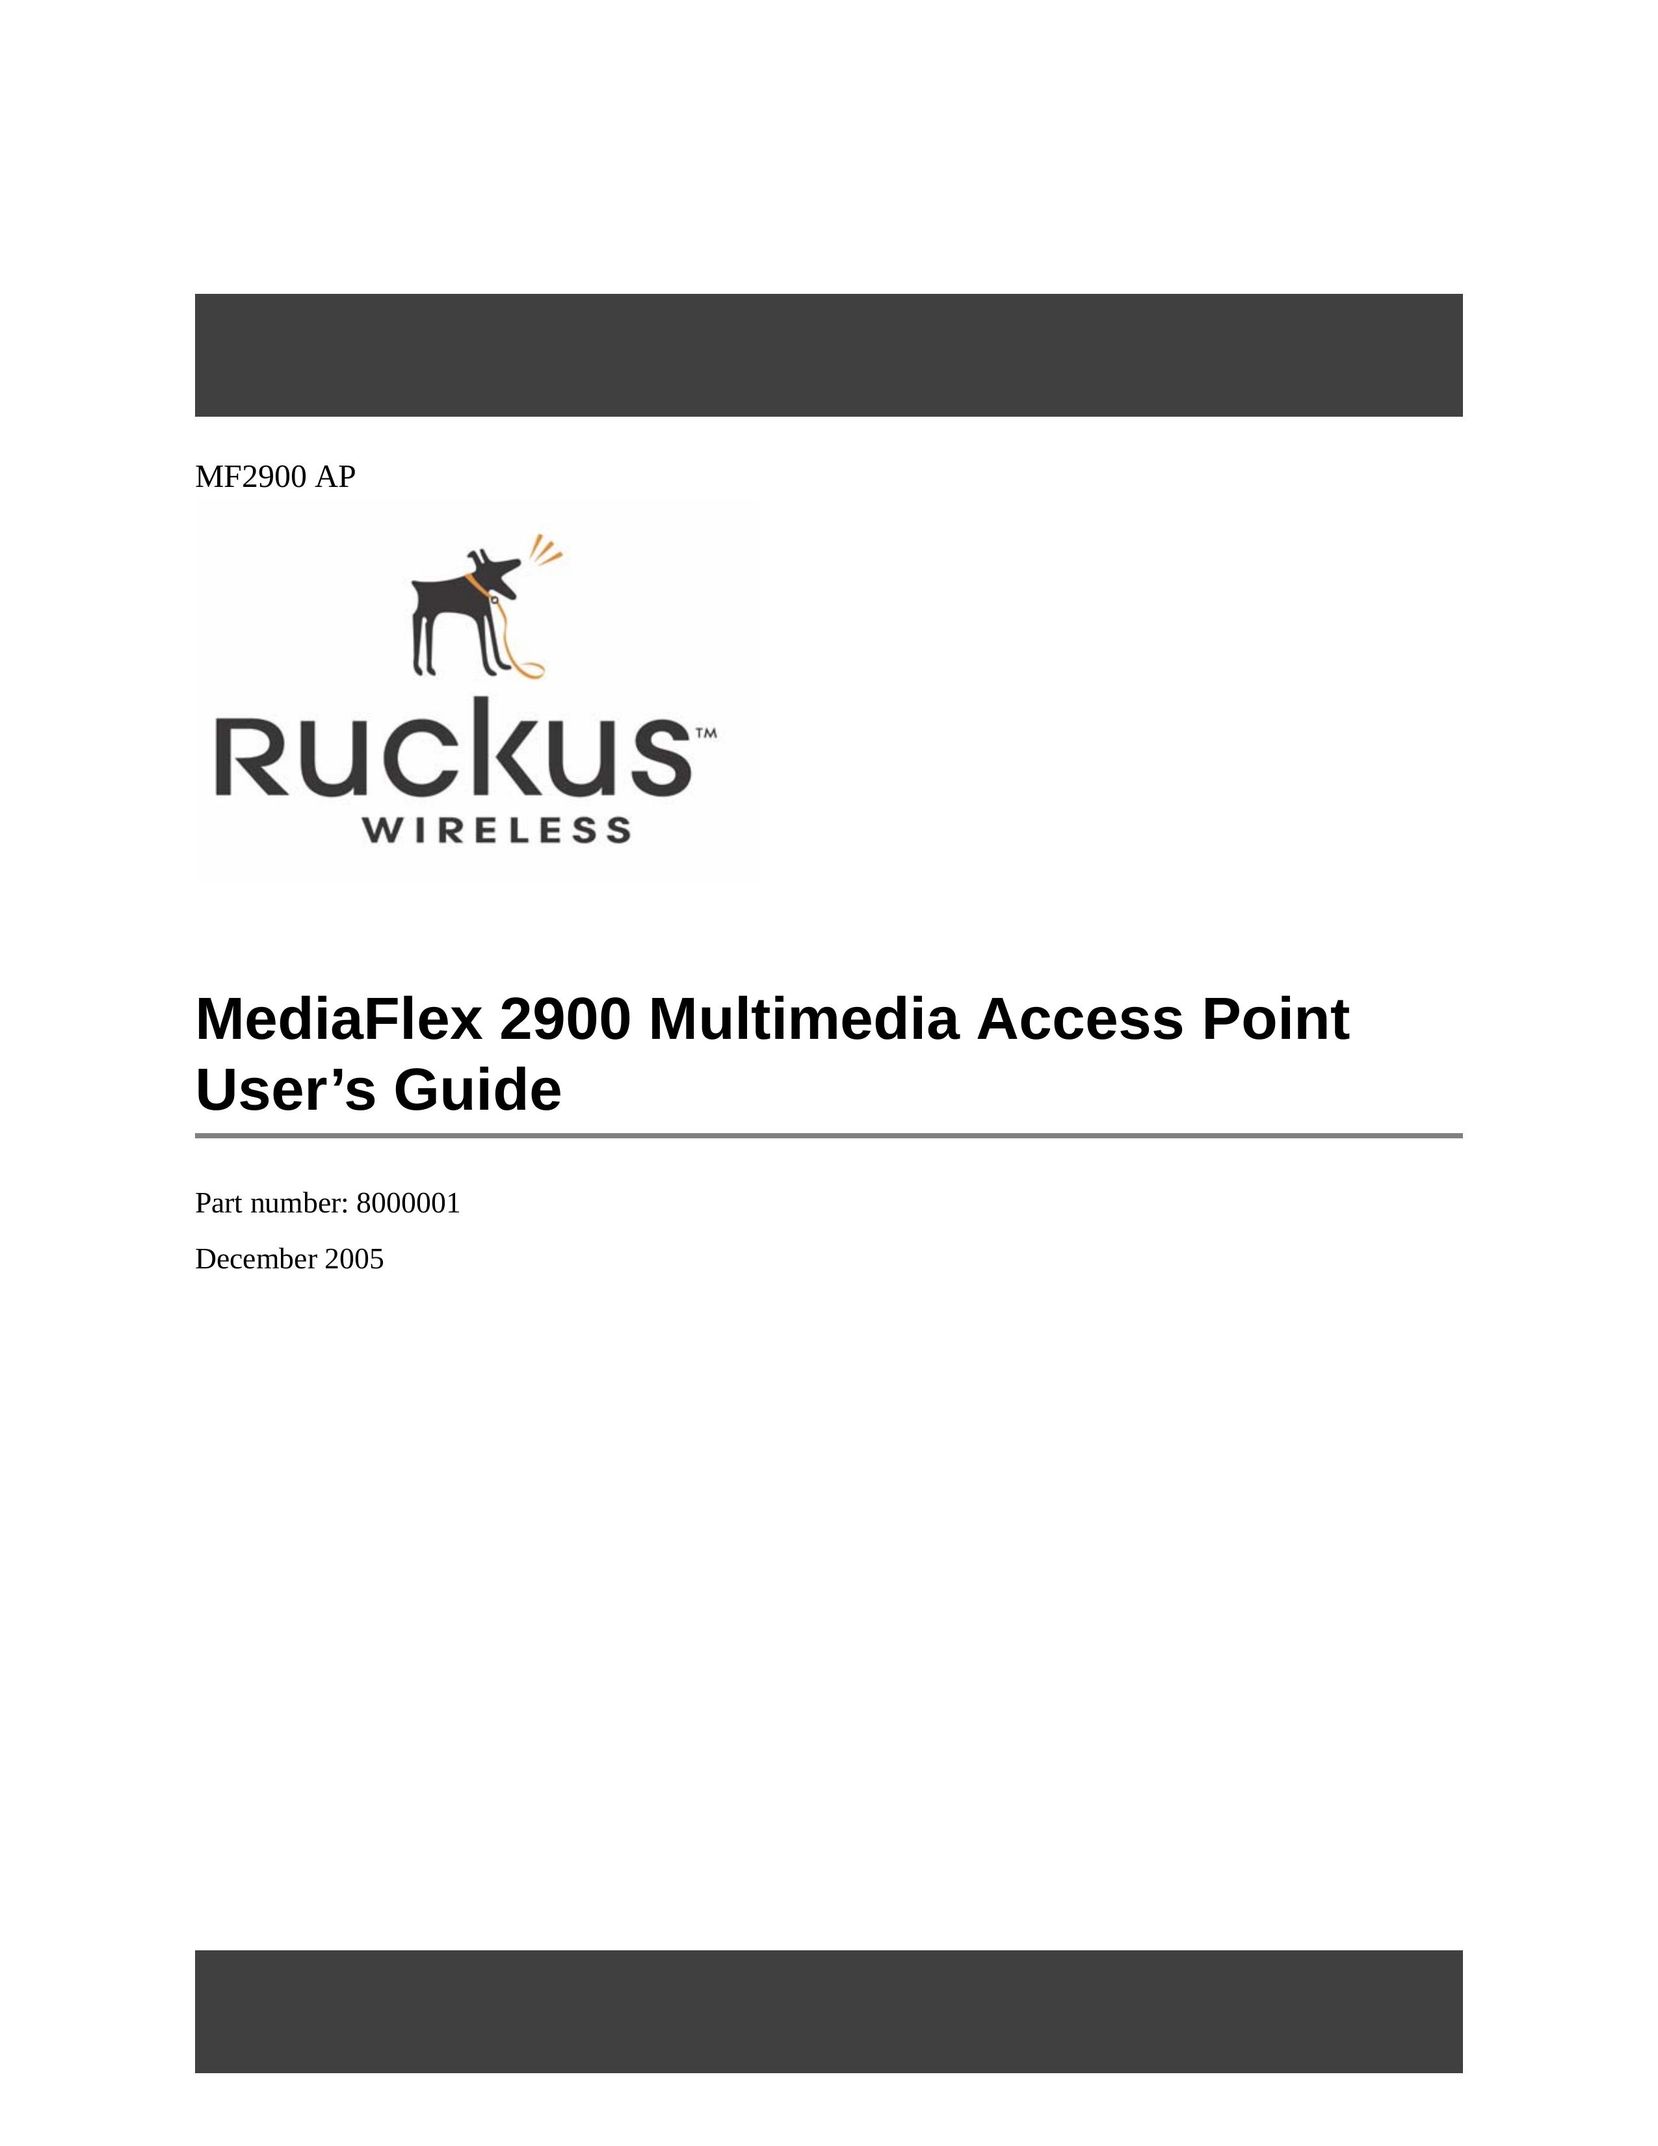 Ruckus Wireless MF2900 Network Router User Manual